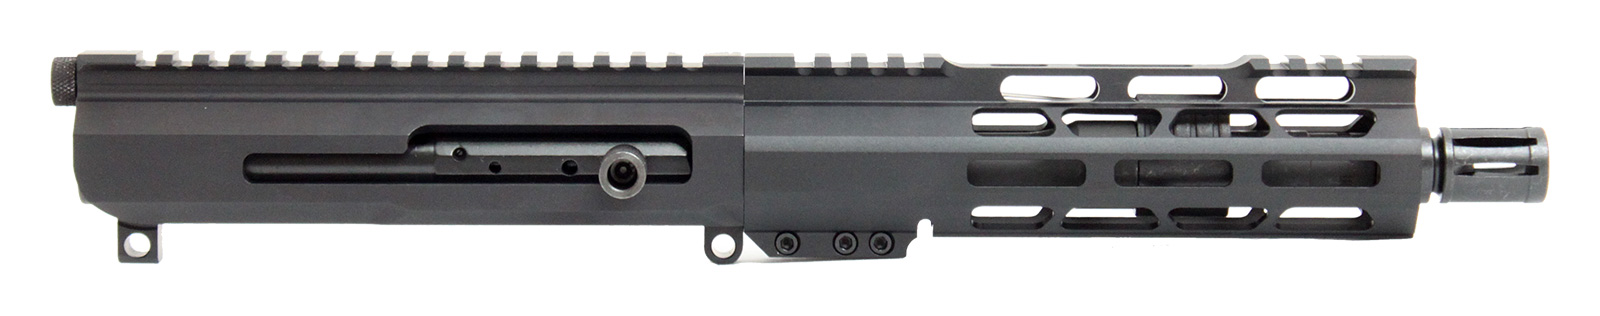 ar15-complete-upper-assembly-7-5-inch-223-wylde-side-charge-m-lok-160015